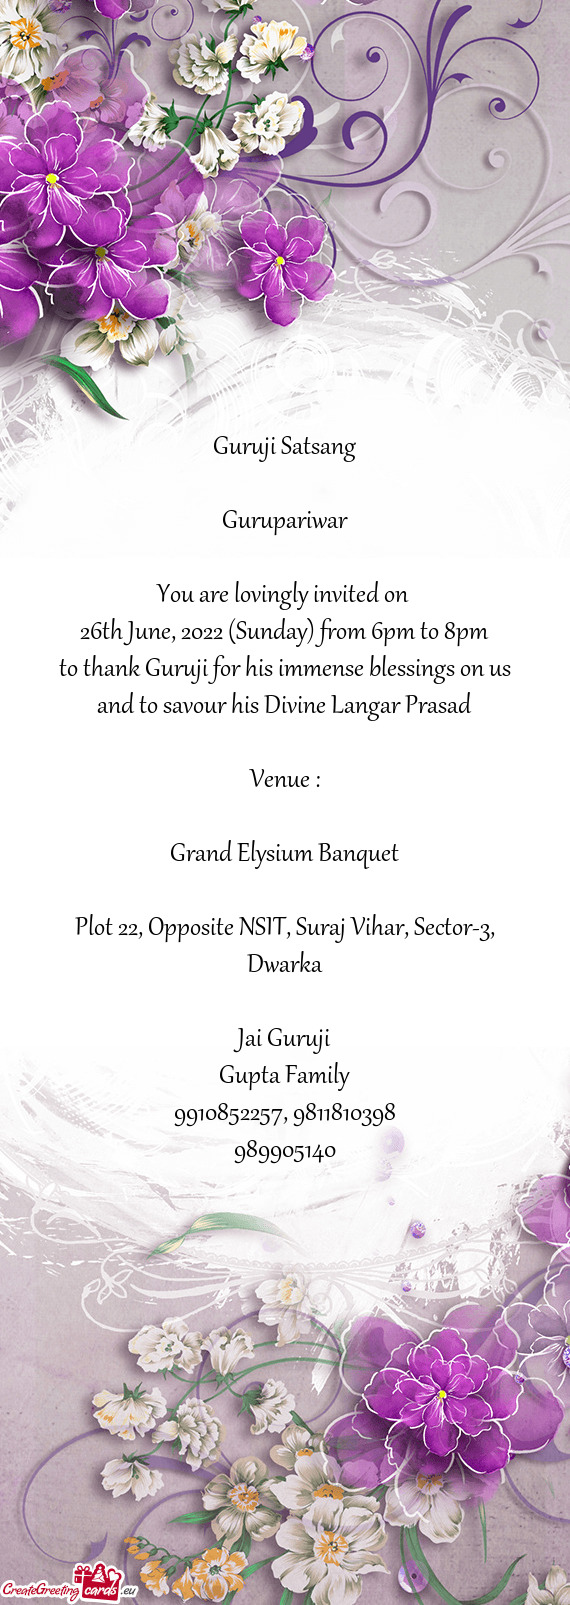 26th June, 2022 (Sunday) from 6pm to 8pm